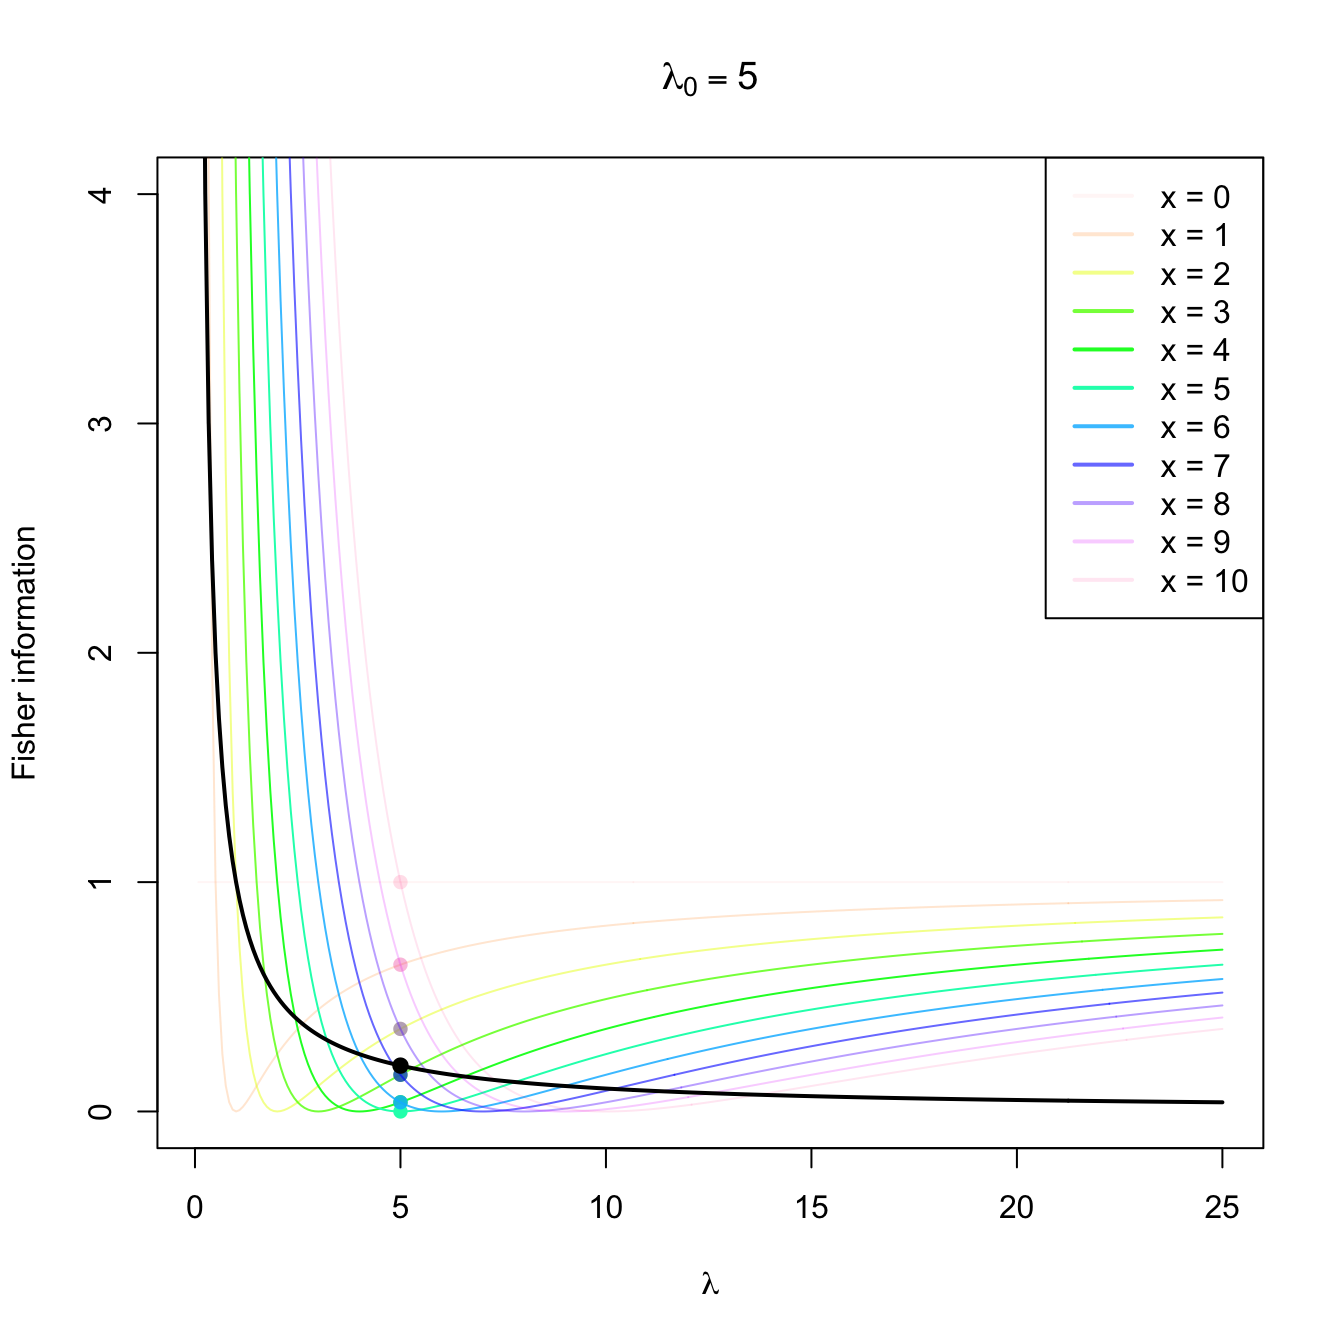 Fisher information integrand \(\lambda\mapsto \left(\partial \log f(x;\lambda)/\partial \lambda\right)^2\) in a \(\mathrm{Pois}(\lambda_0)\) distribution with \(\lambda_0=2,5,10.\) The integrands are shown in different colors, with the color transparency indicating the probability of \(x\) according to \(\mathrm{Pois}(\lambda_0)\) (the darker the color, the higher the probability). The Fisher information curve \(\lambda\mapsto \mathcal{I}(\lambda)\) is shown in black, with a black point signaling the value \(\mathcal{I}(\lambda_0).\) The colored points indicate the contribution of each \(x\) to the Fisher information.